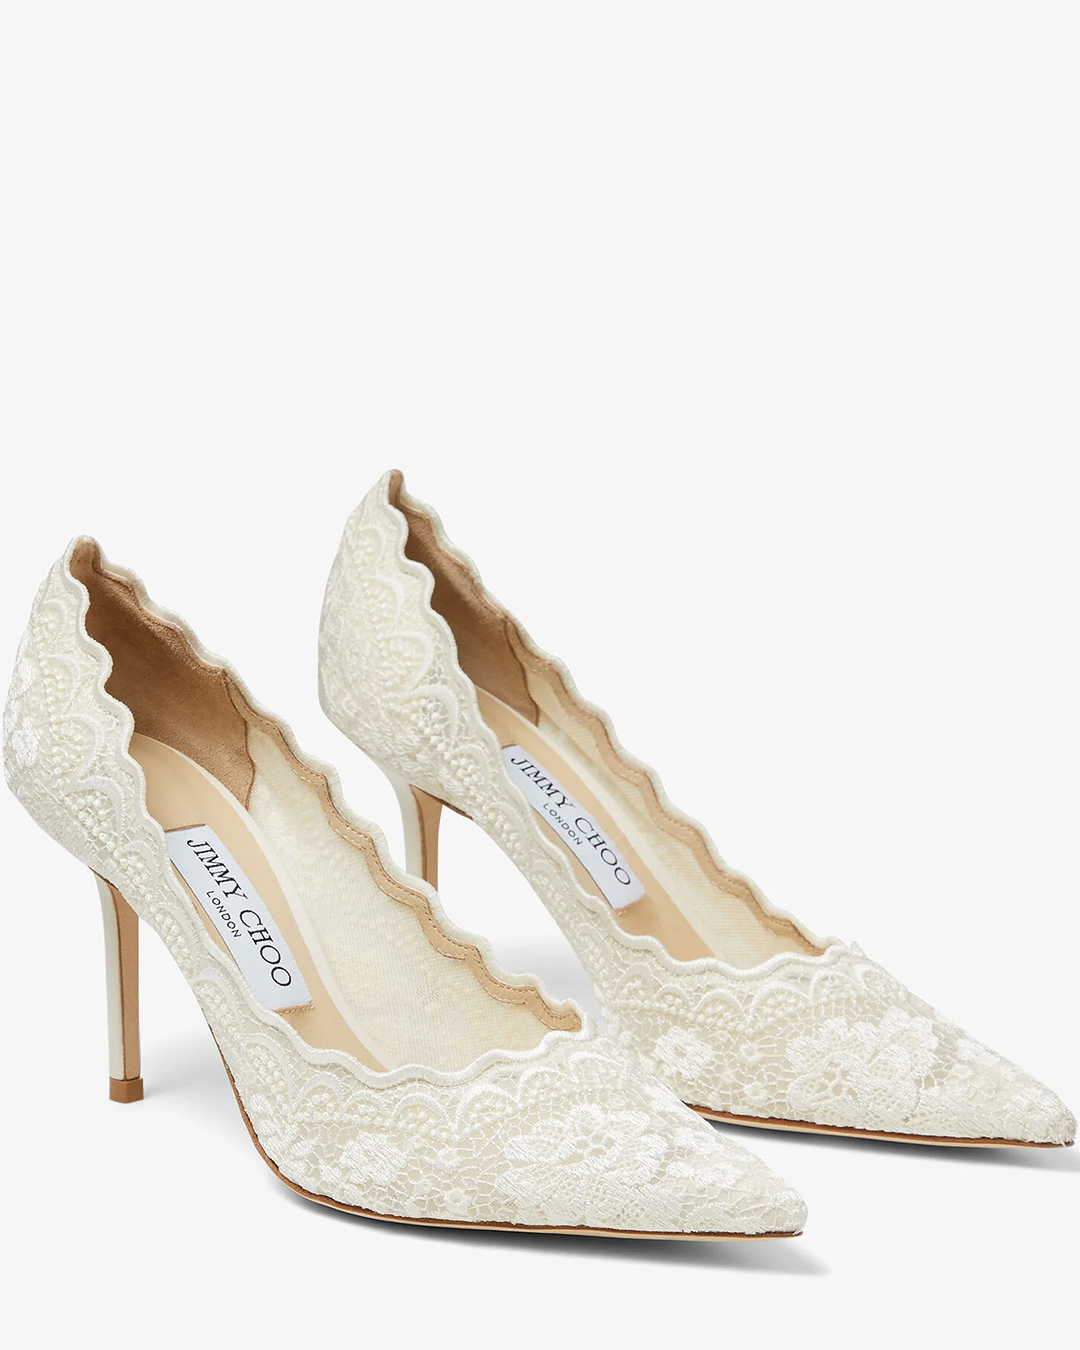 jimmy choo wedding shoes lace with heels pumps